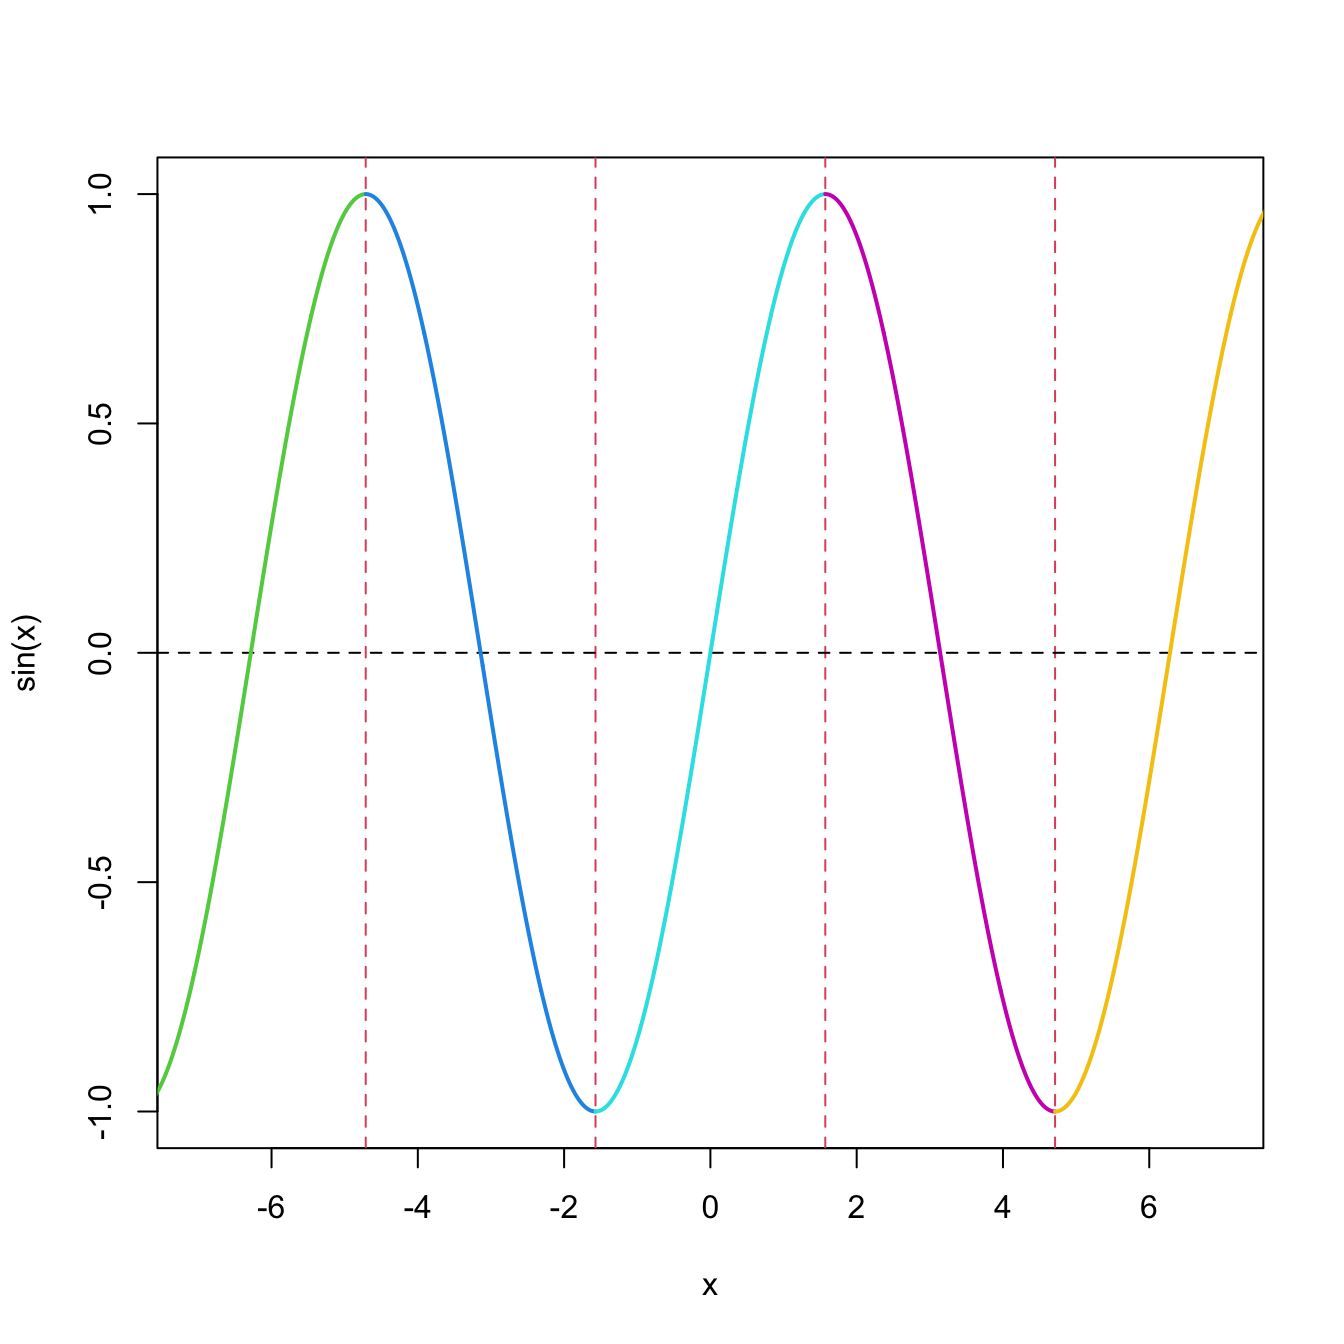 Injective regions of the sine function, marked in different colors separated by vertical dashed lines. There is an infinite number of injective regions.